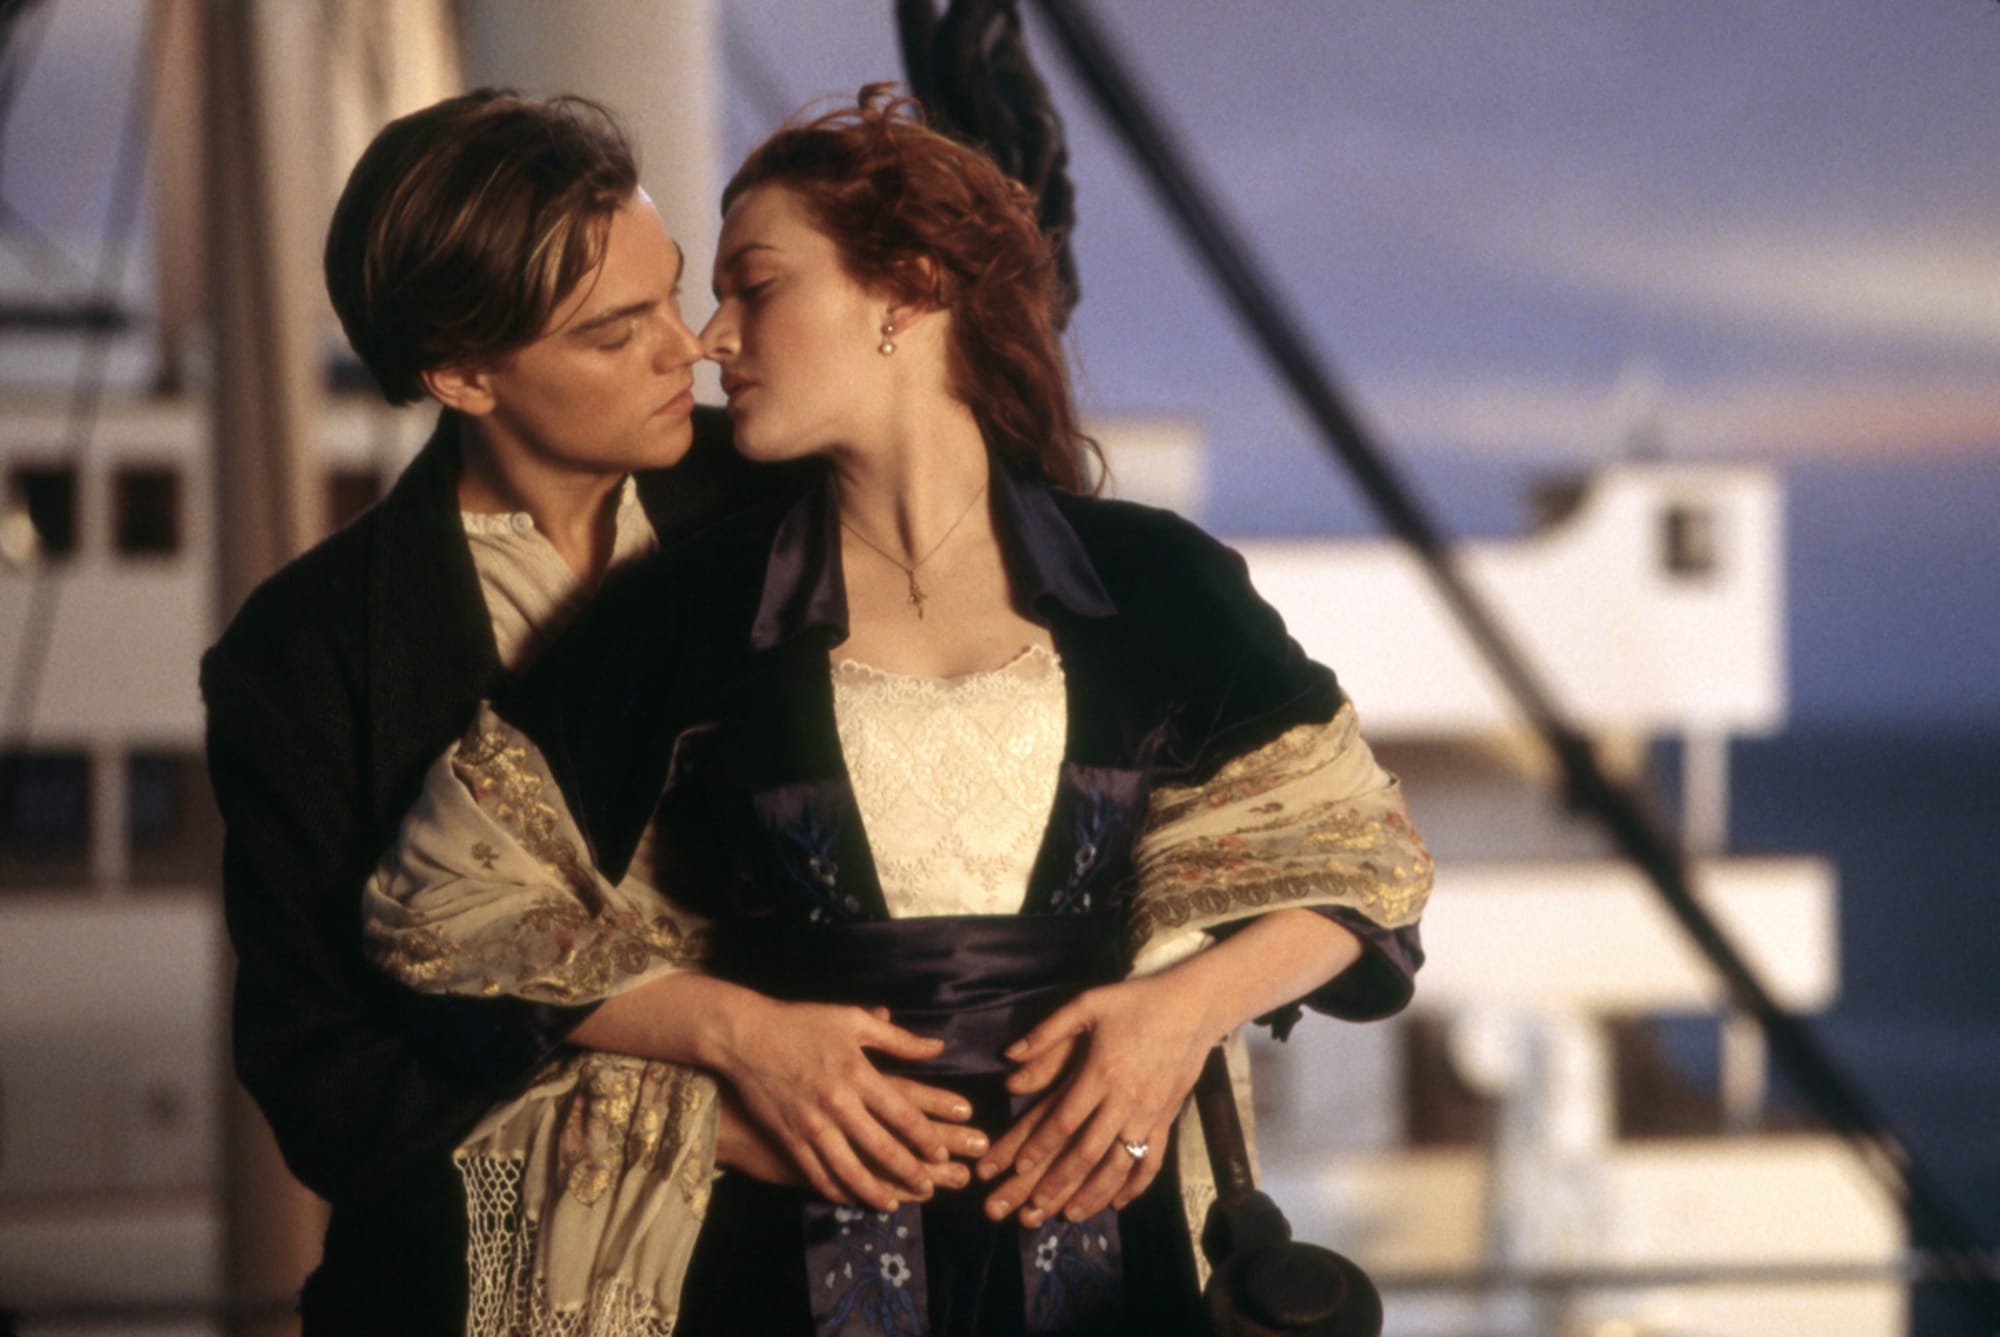 Titanic cast ages: How old was the cast then (and now)?